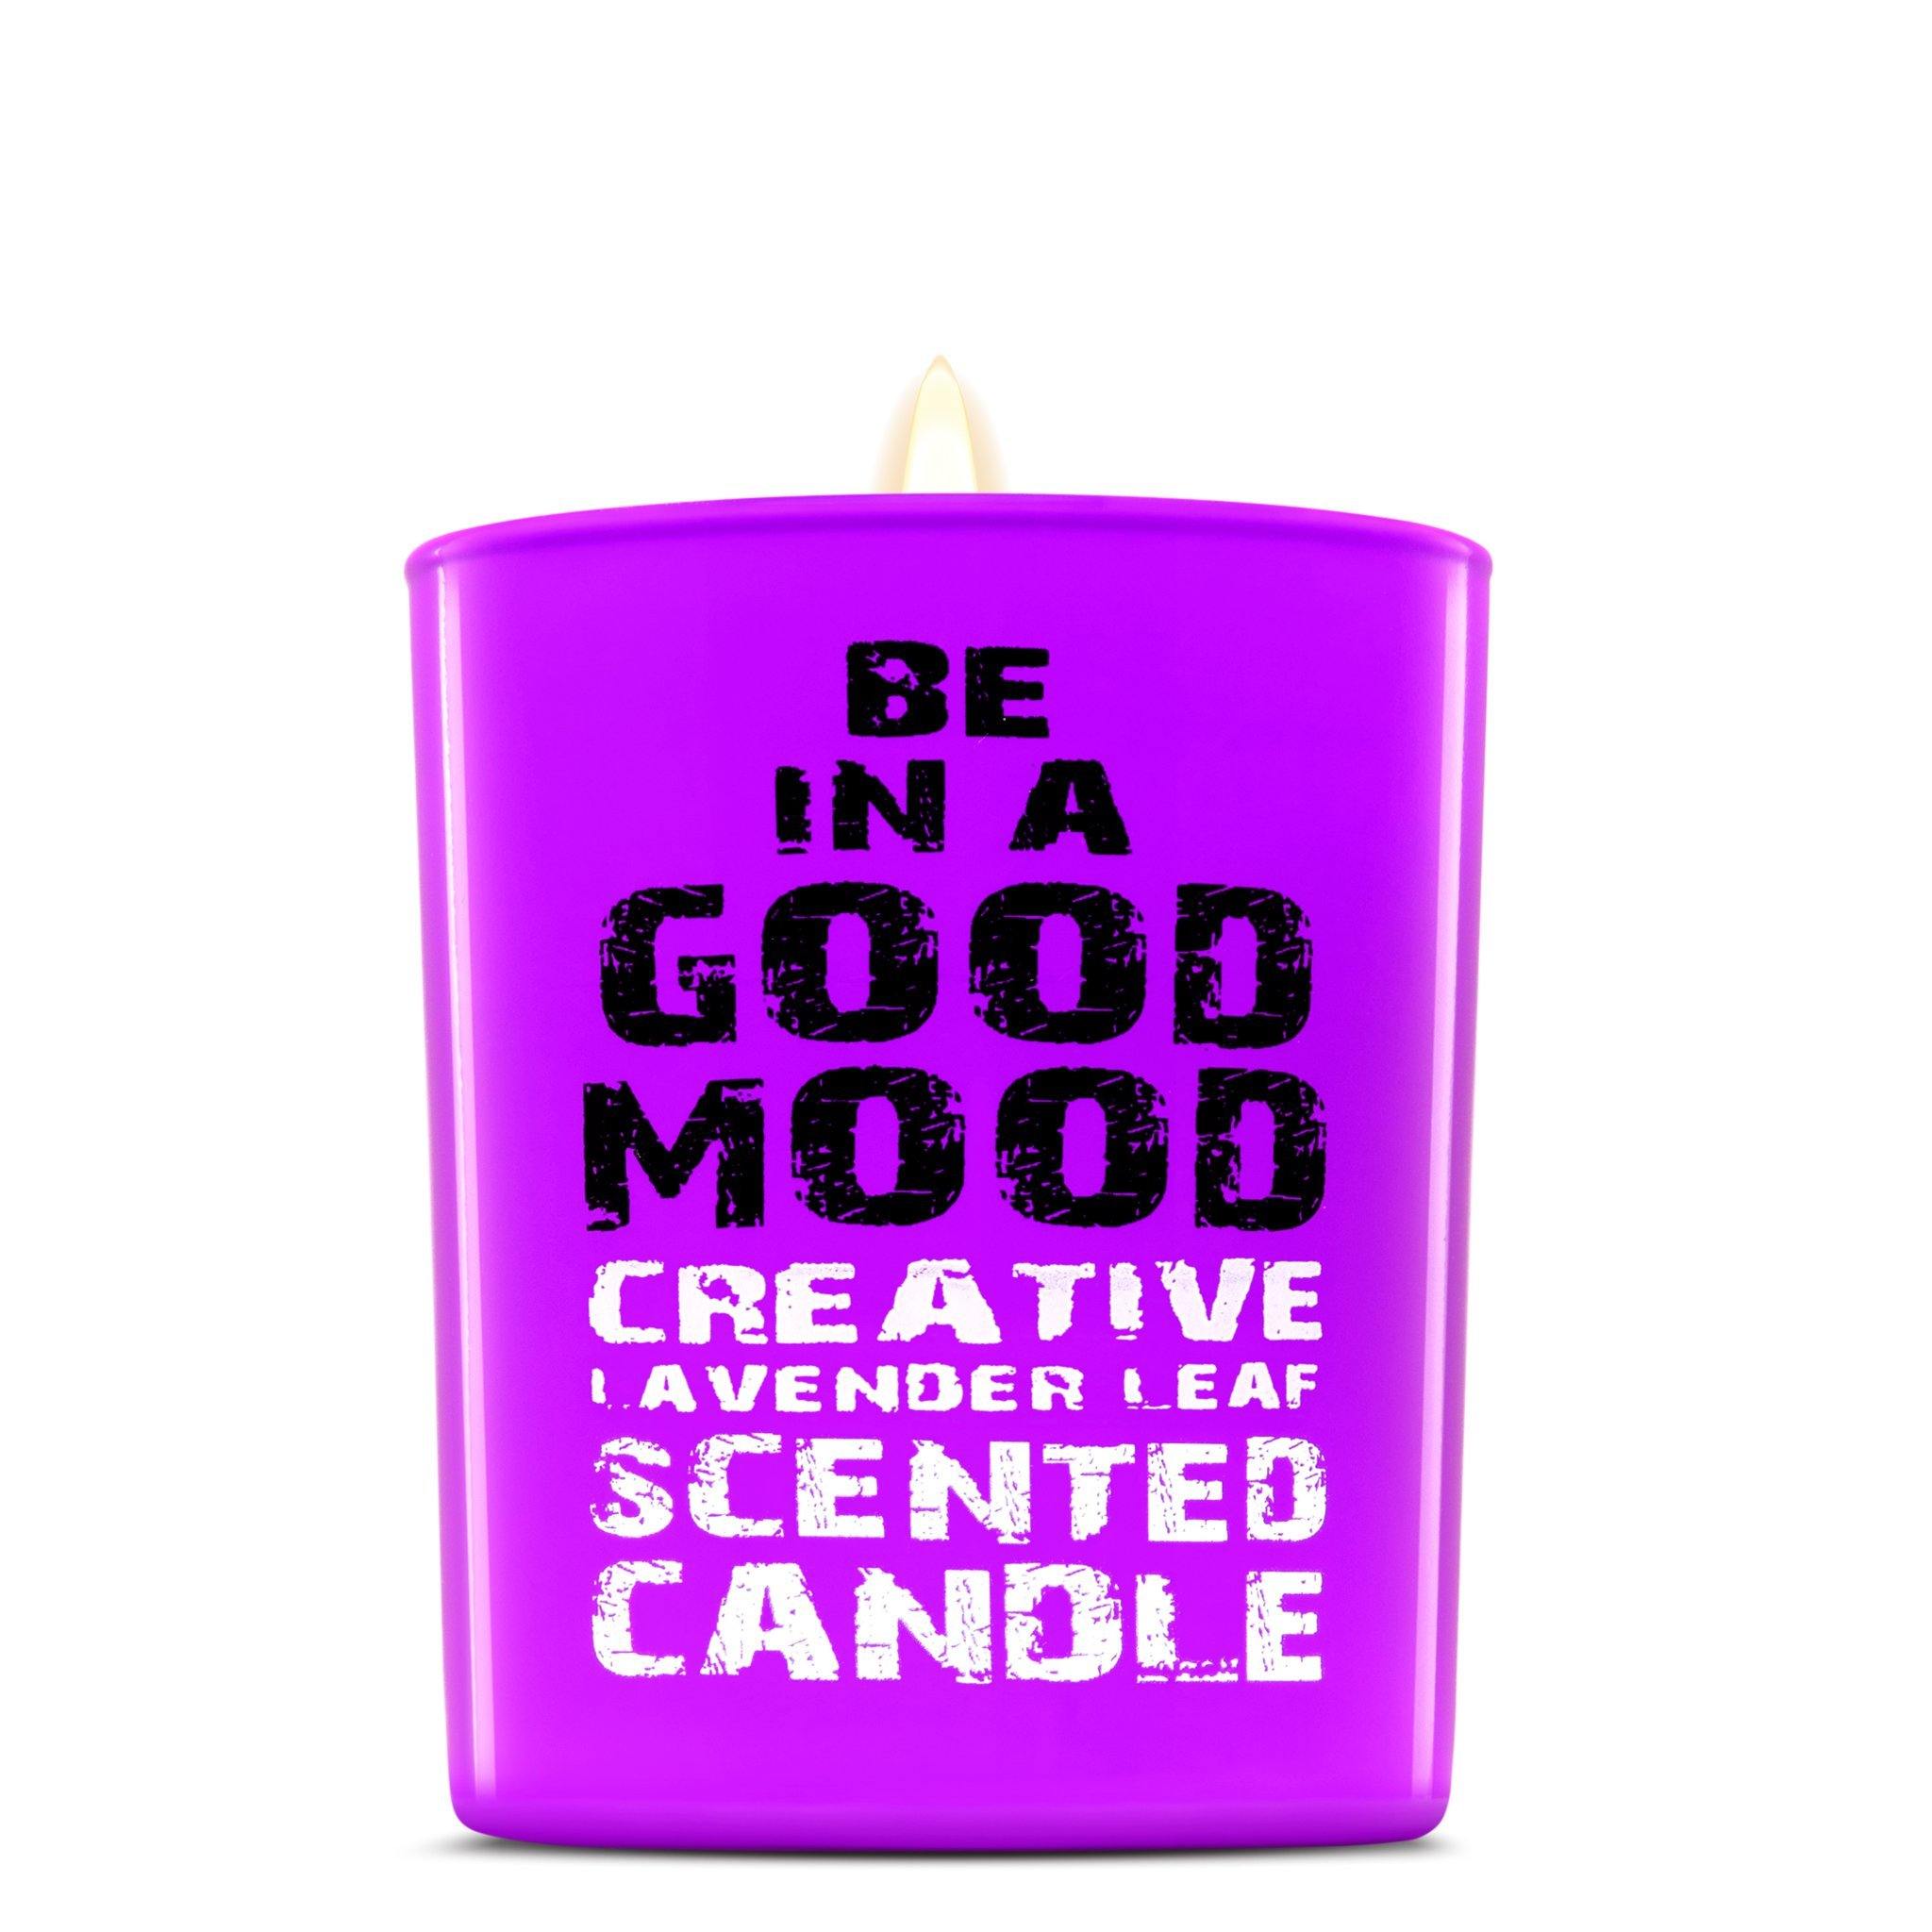 Be in a Good Mood Creative Scented Candle - MeMeMe Home And Beauty